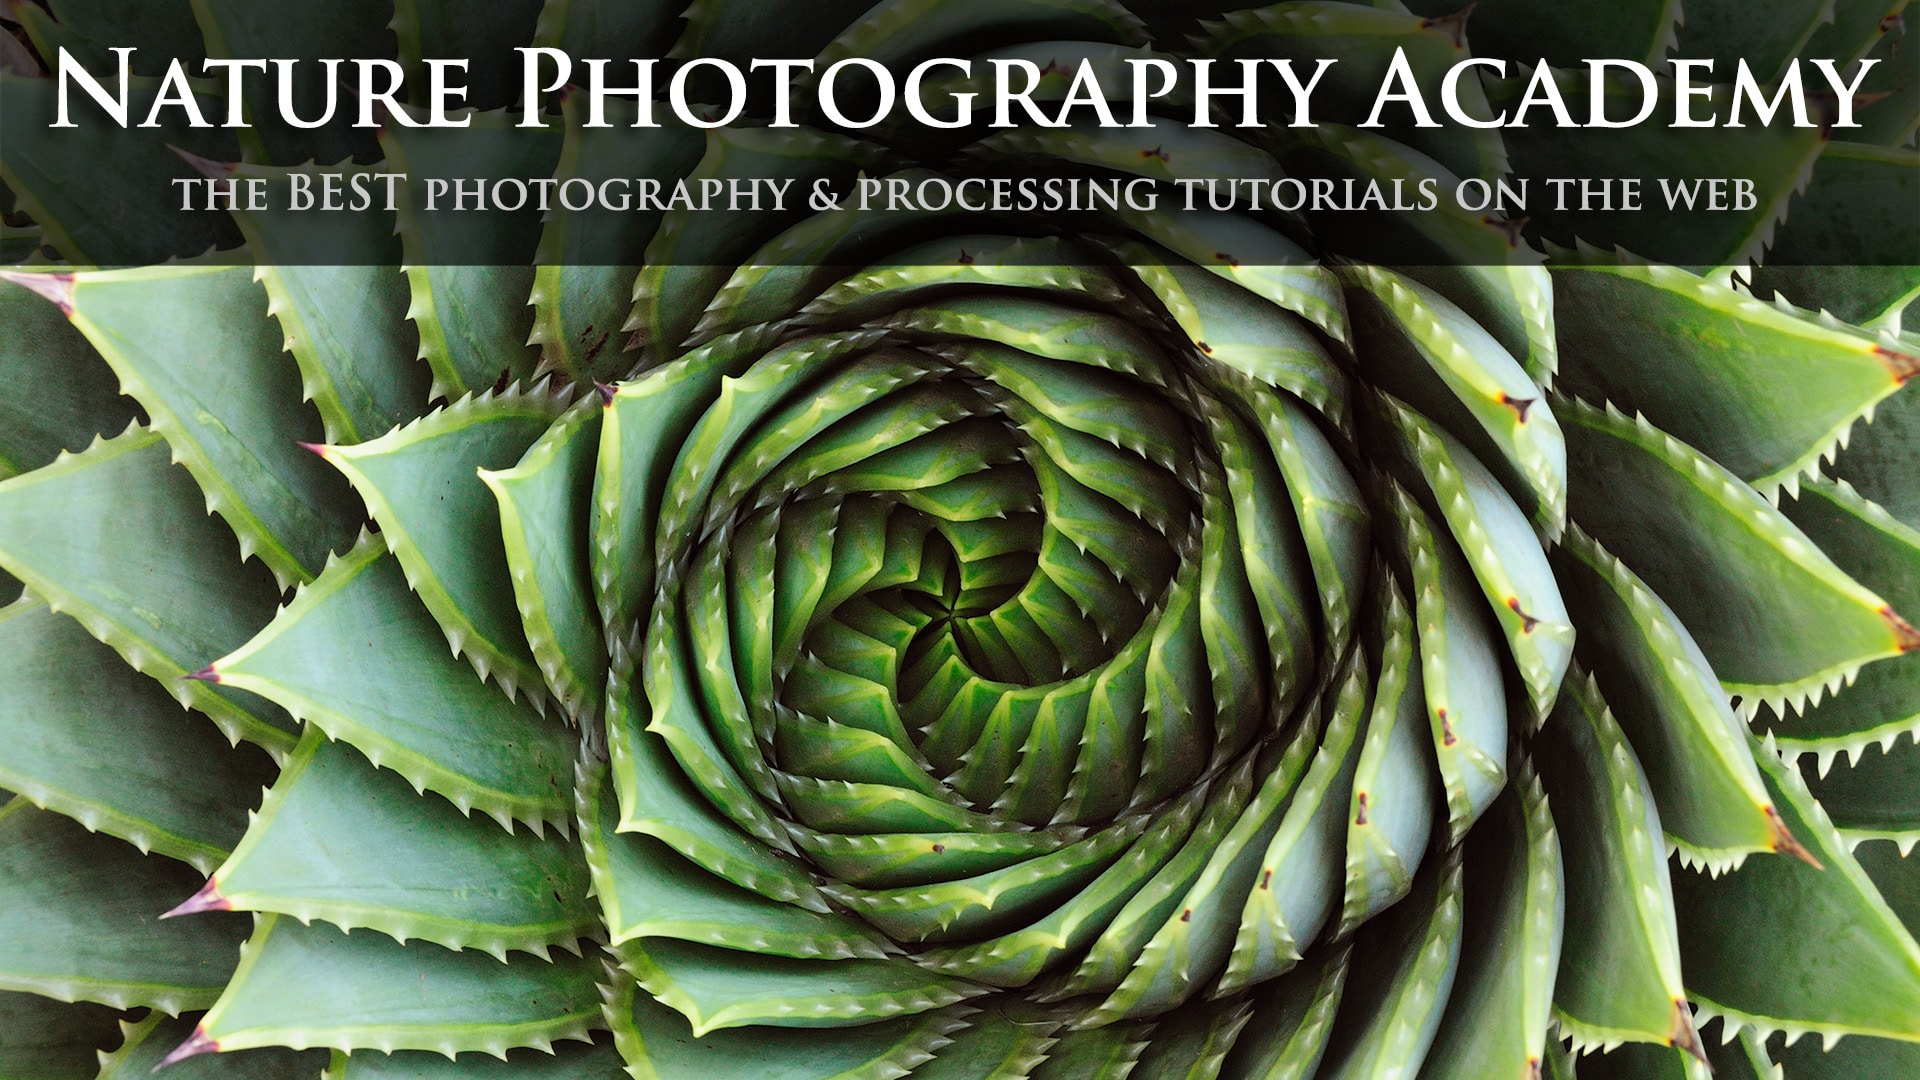 The Nature Photography Academy Announcement